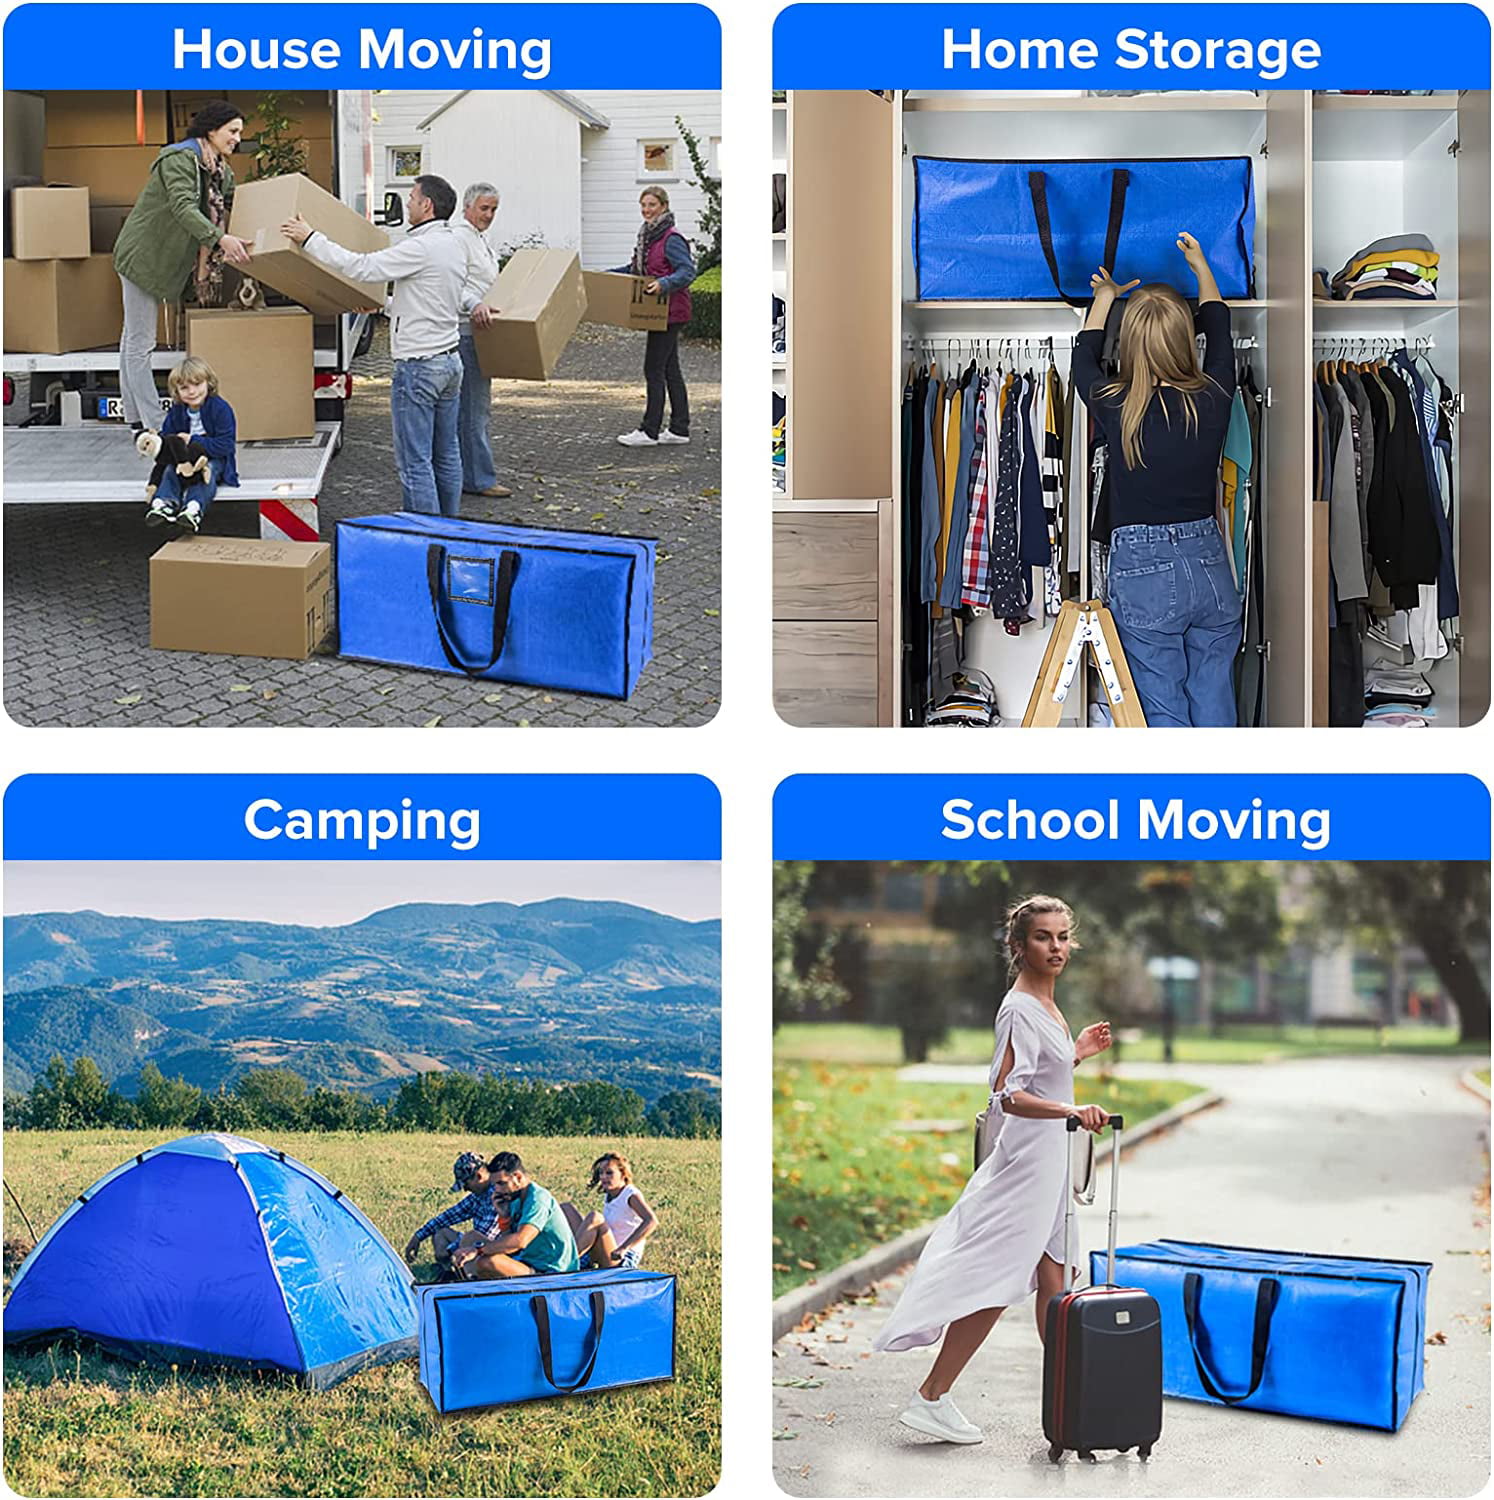 GZBtech 4 Pcs Heavy Duty Moving Bags,Large Waterproof Storage Bag with Handles and Zippers for House Moving Camping Packing Clothes Bedding, Adult Unisex